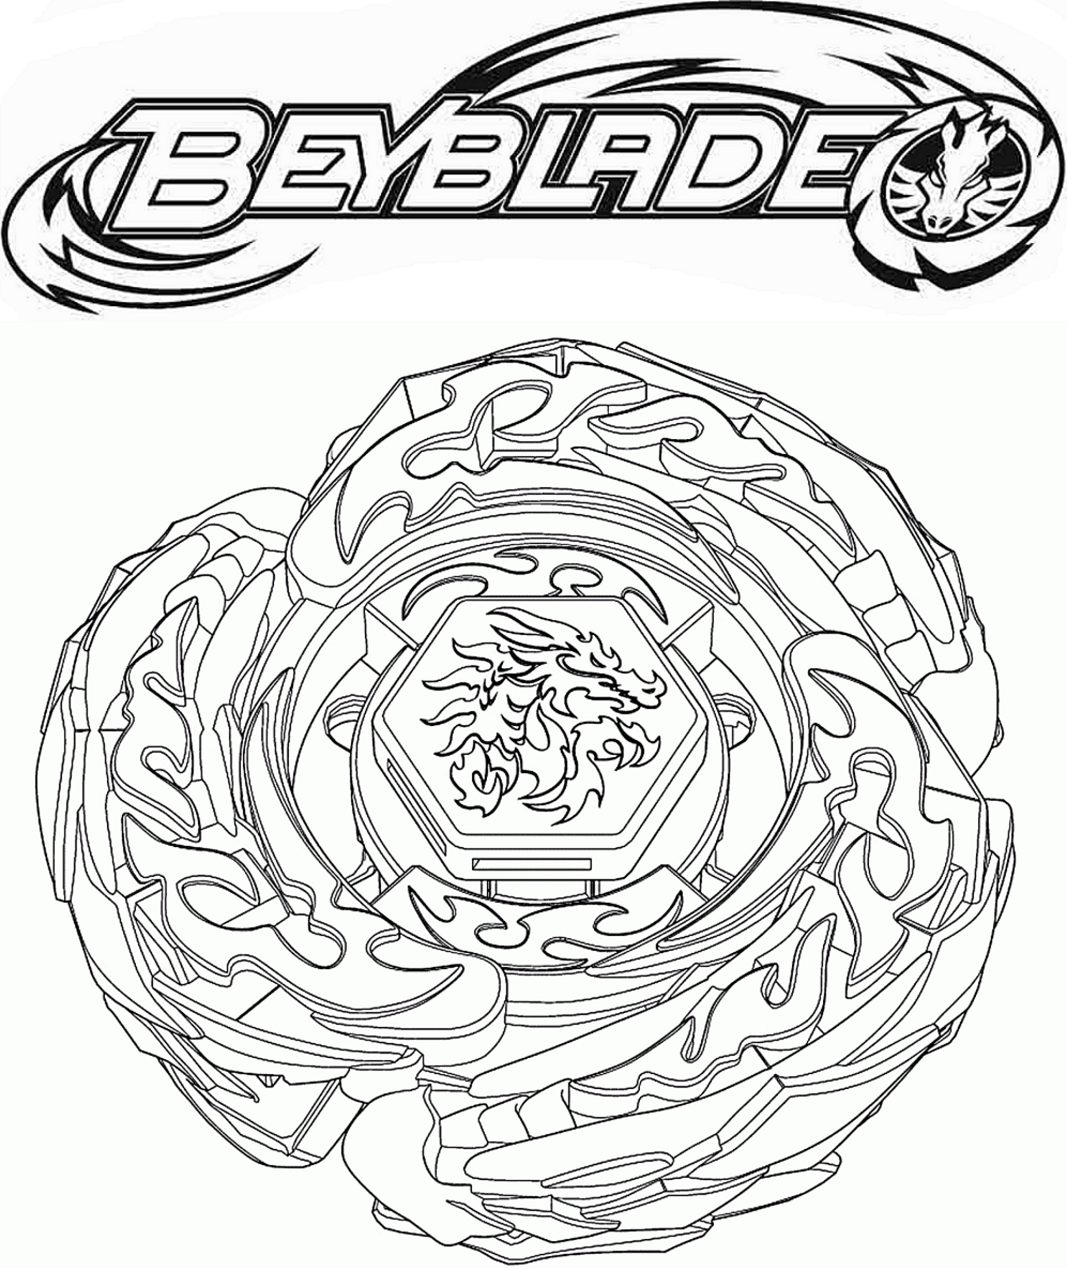 Lightning L Drago Coloring Page - Free Printable Coloring Pages for Kids